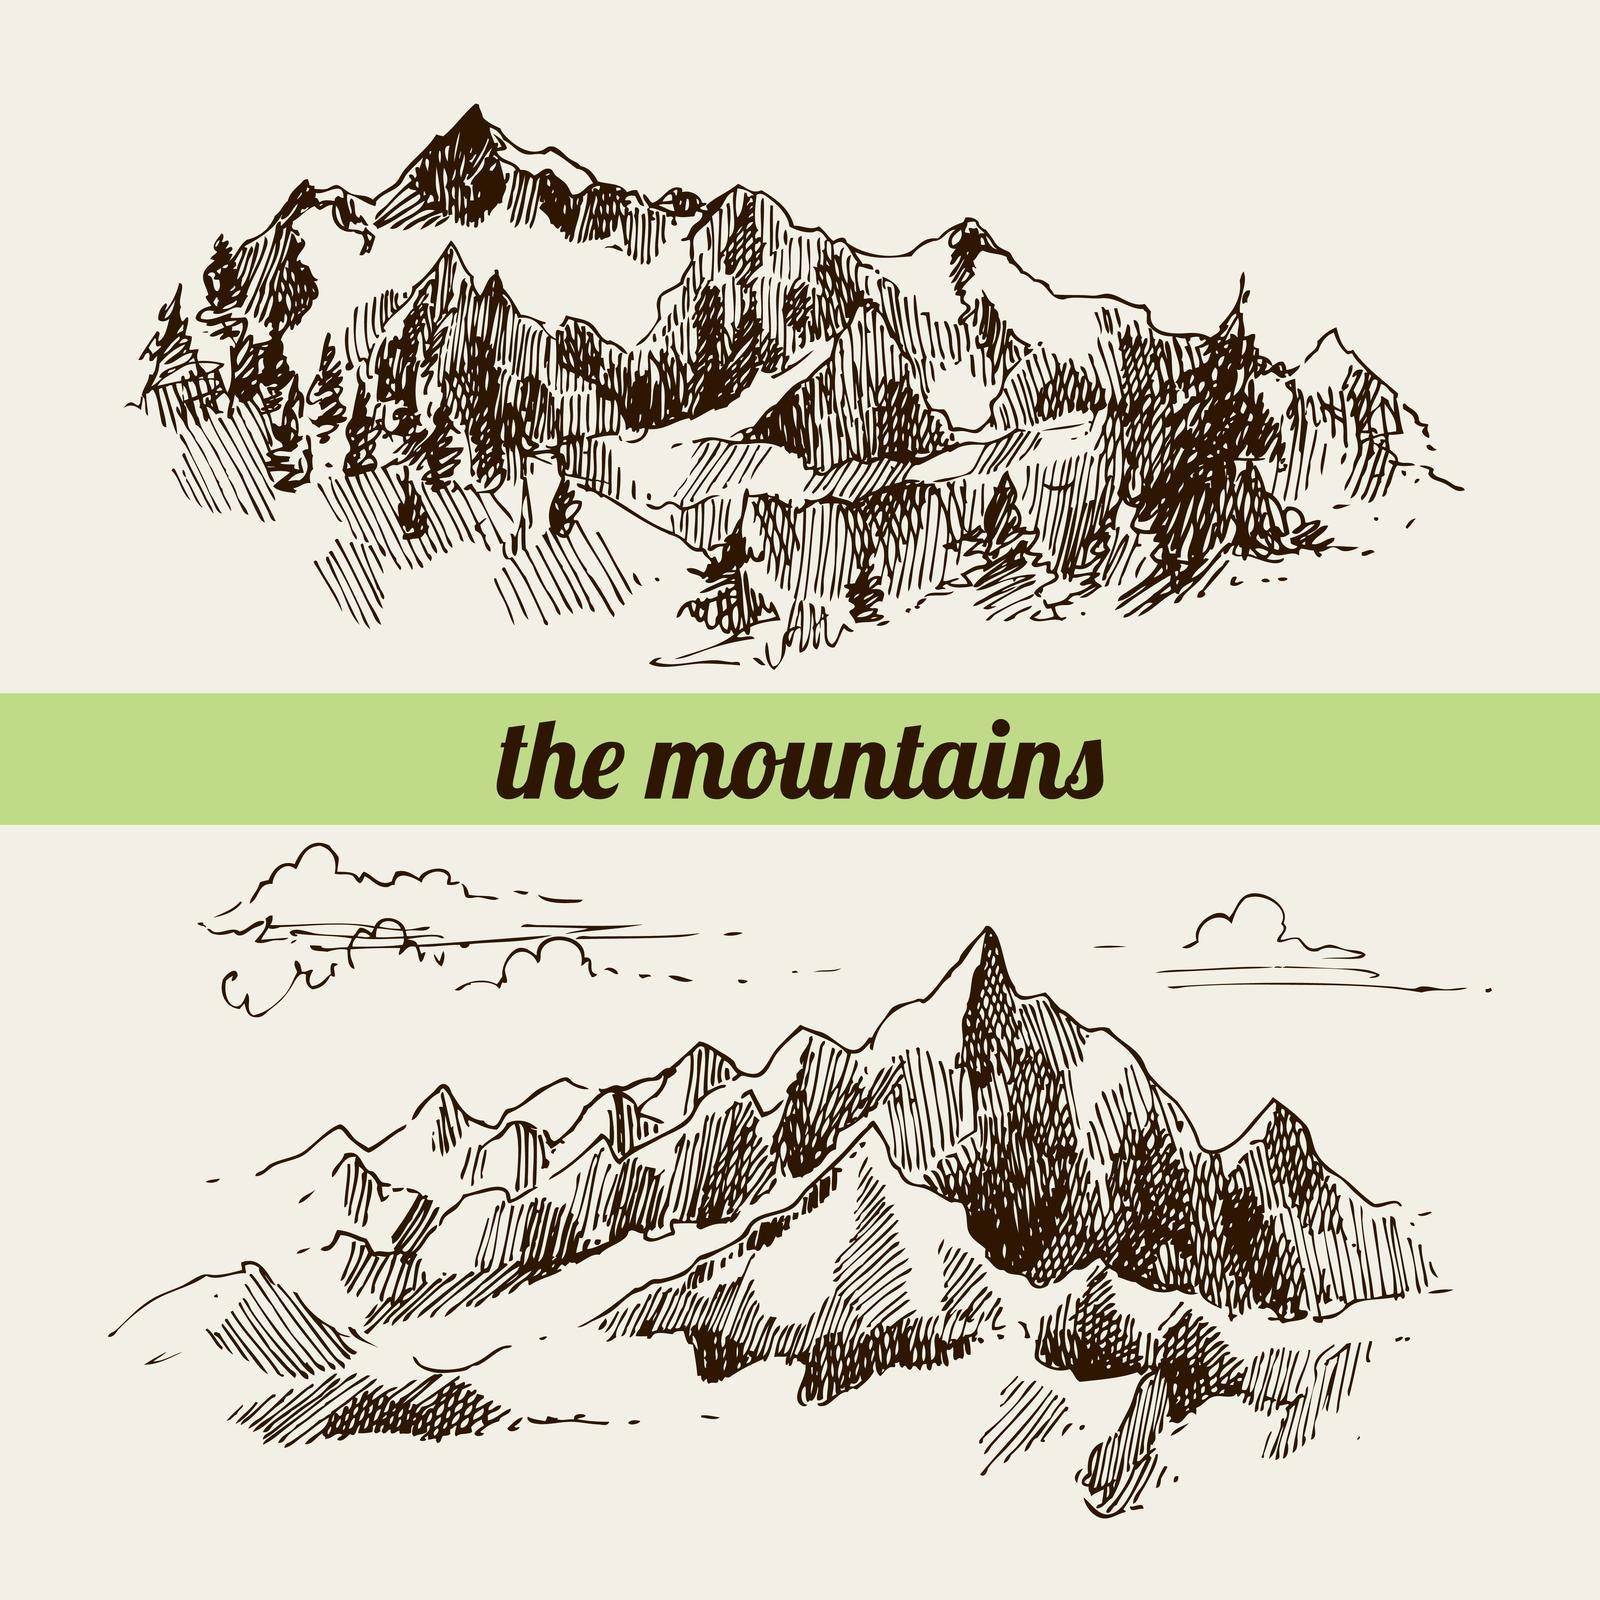 Mountains sketch, contours of the mountains engraving style, hand drawn vector illustration